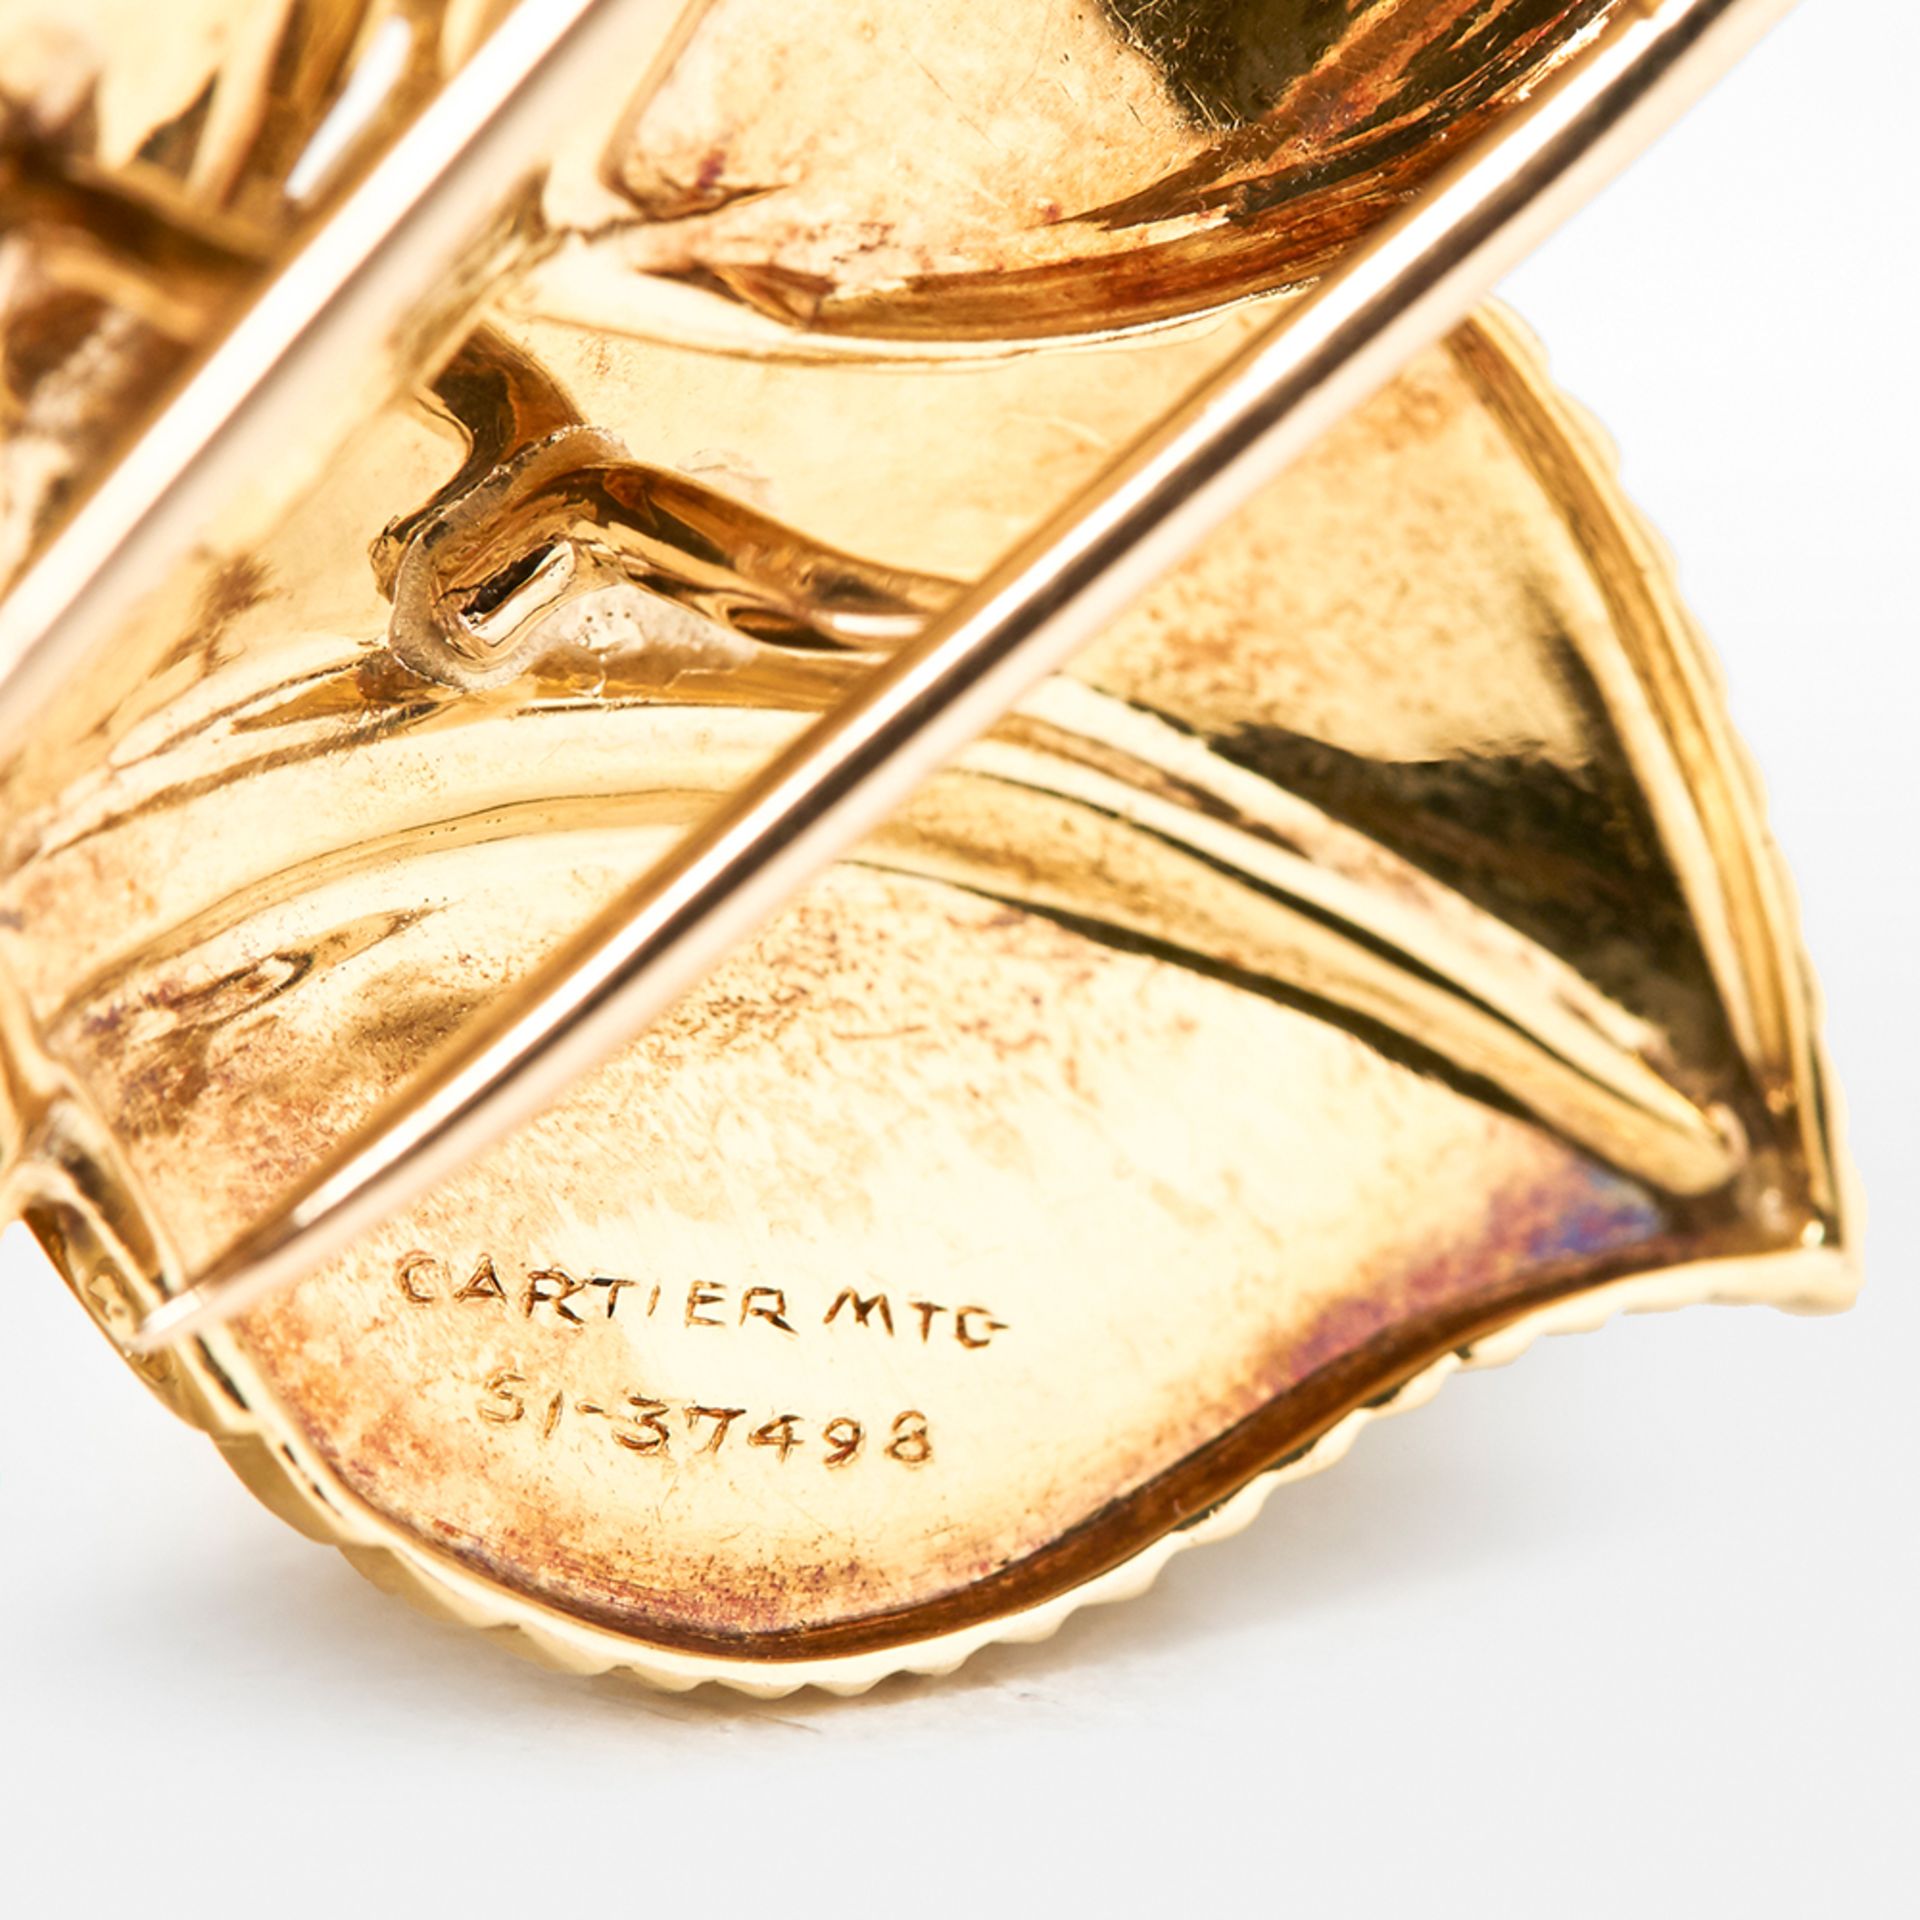 Cartier 18k Yellow Gold Diamond Vintage Leaf Brooch with Presentation Box - Image 16 of 16